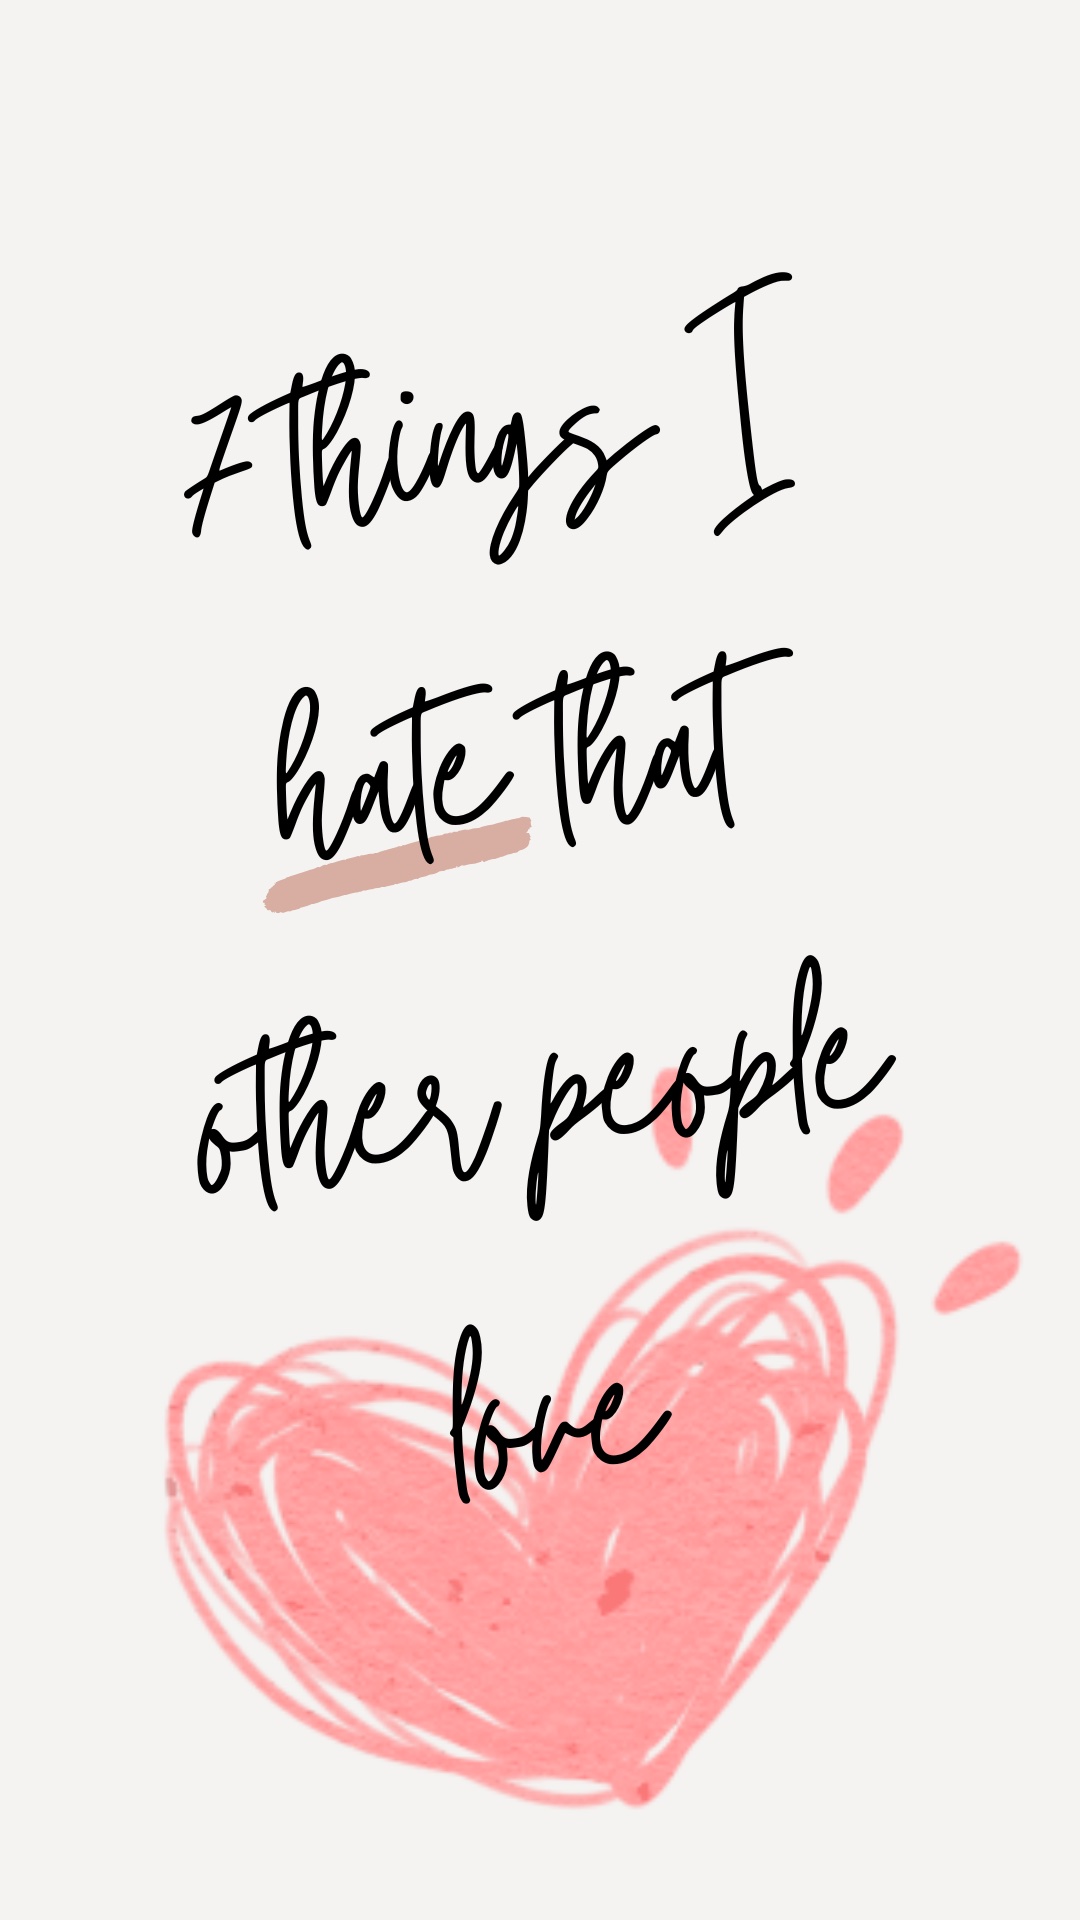 7 things I hate that other people love